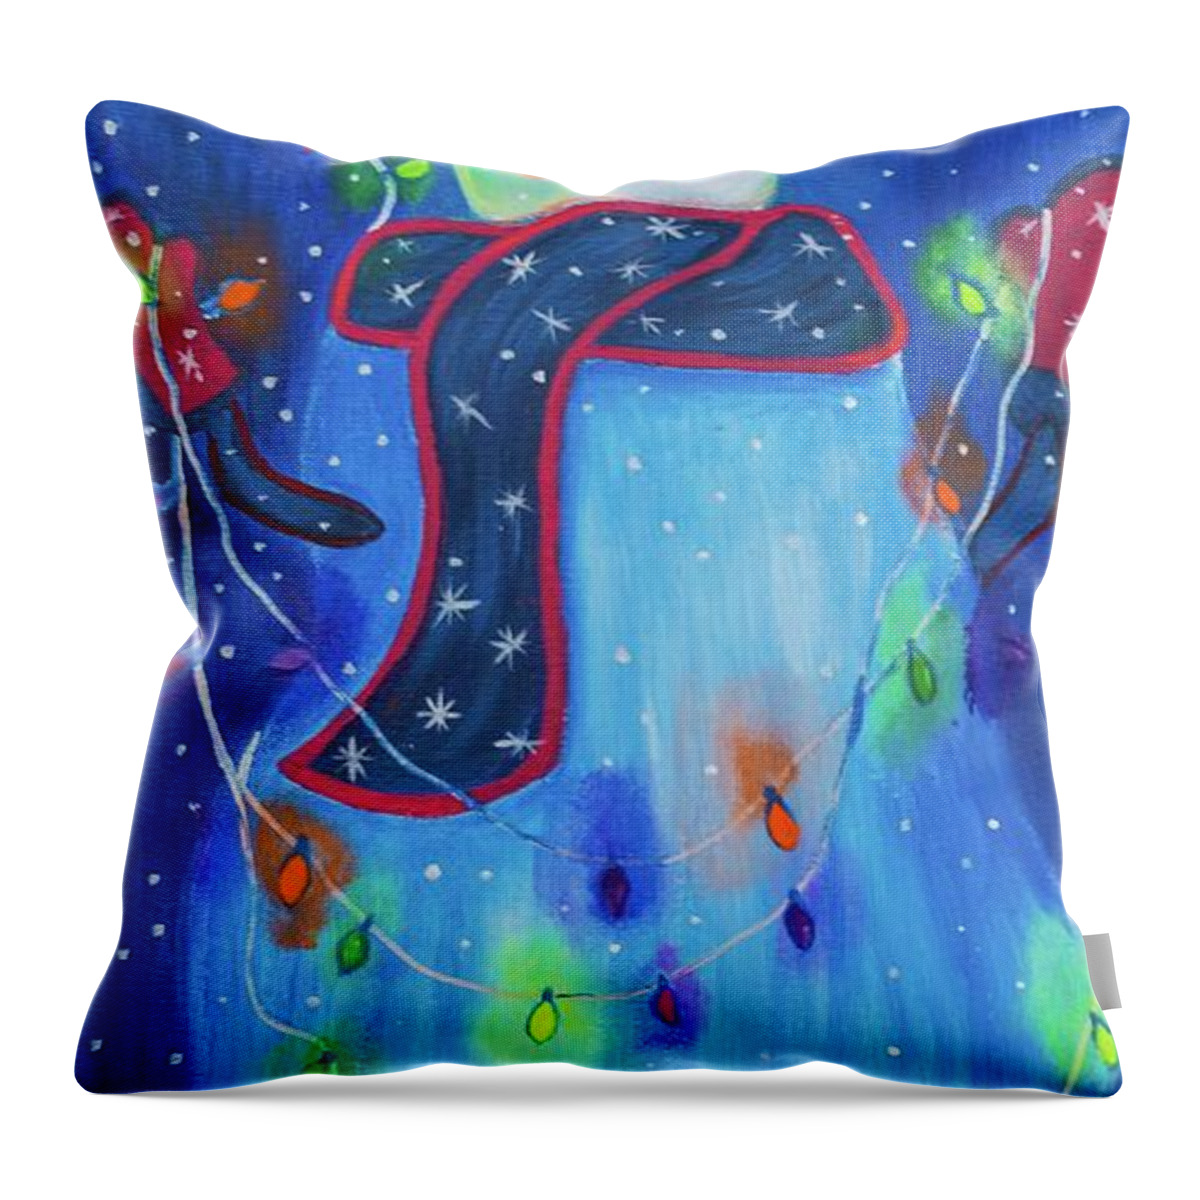 Snowman Throw Pillow featuring the painting Bright Light Snowman by Neslihan Ergul Colley